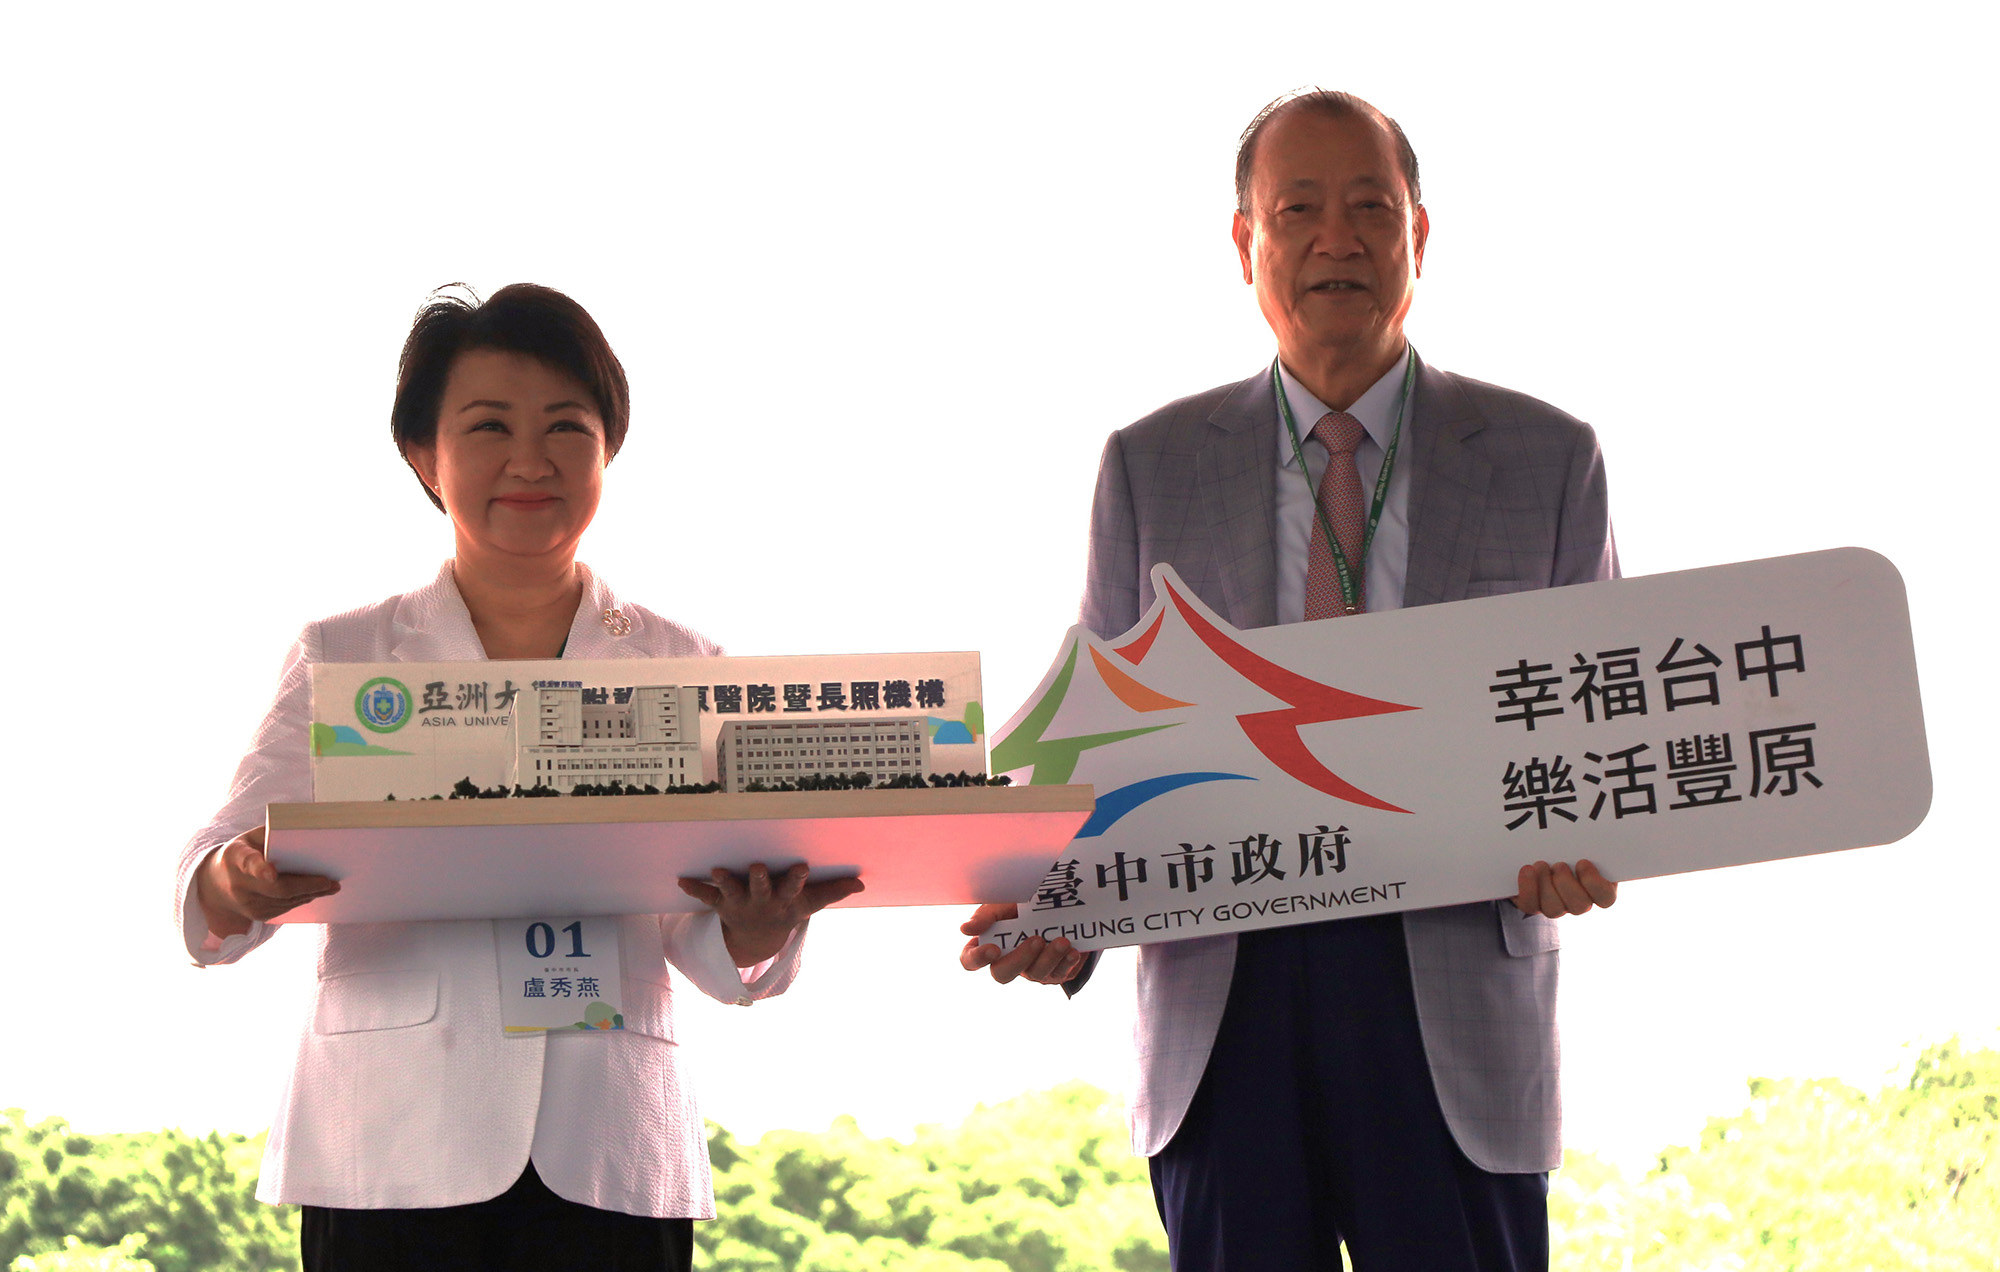 Mayor Hsiu-Yen Lu of Taichung City (left) and the founder of Asia University, Chang-Hai Tsai (right), exchanging tokens, symbolizing the construction of the "Asia University Fengfu Health Park" as a representation of "Happy Taichung, Lively Fengyuan"